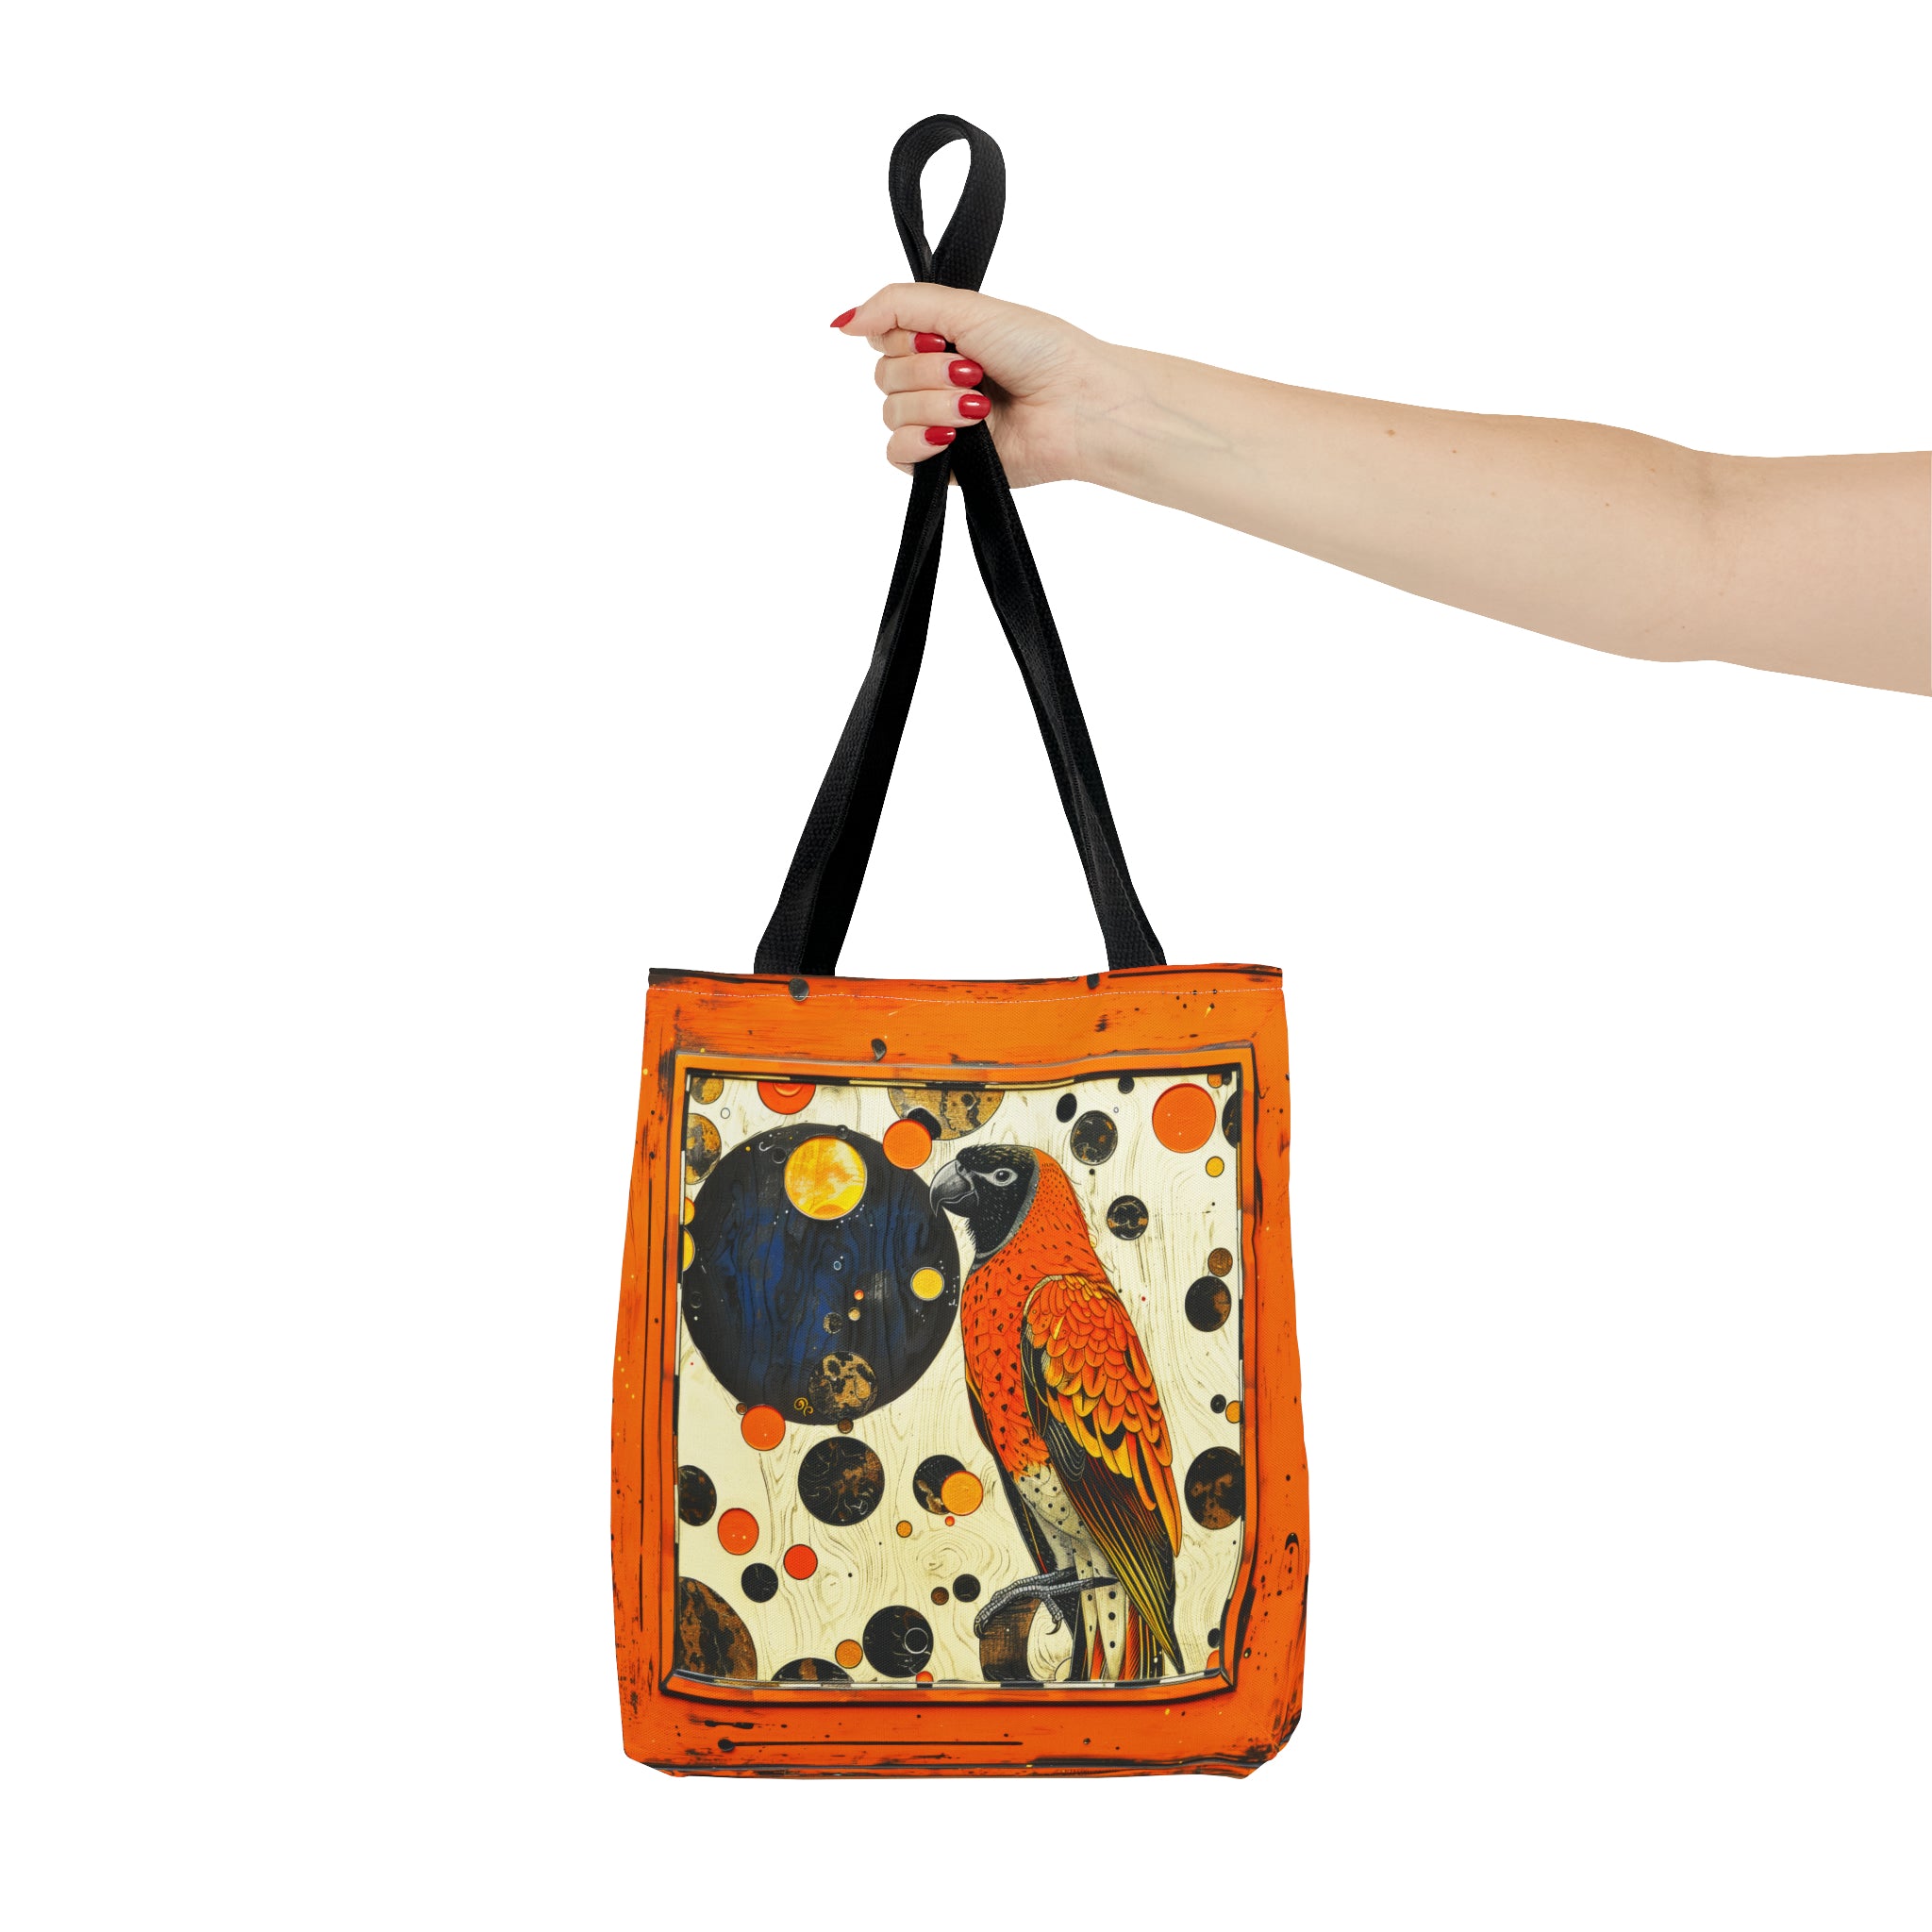 Canvas Tote Bag, vintage inspired bird in an orange frame design, vibrant artistic accessory, whimsical all over print bag in three sizes